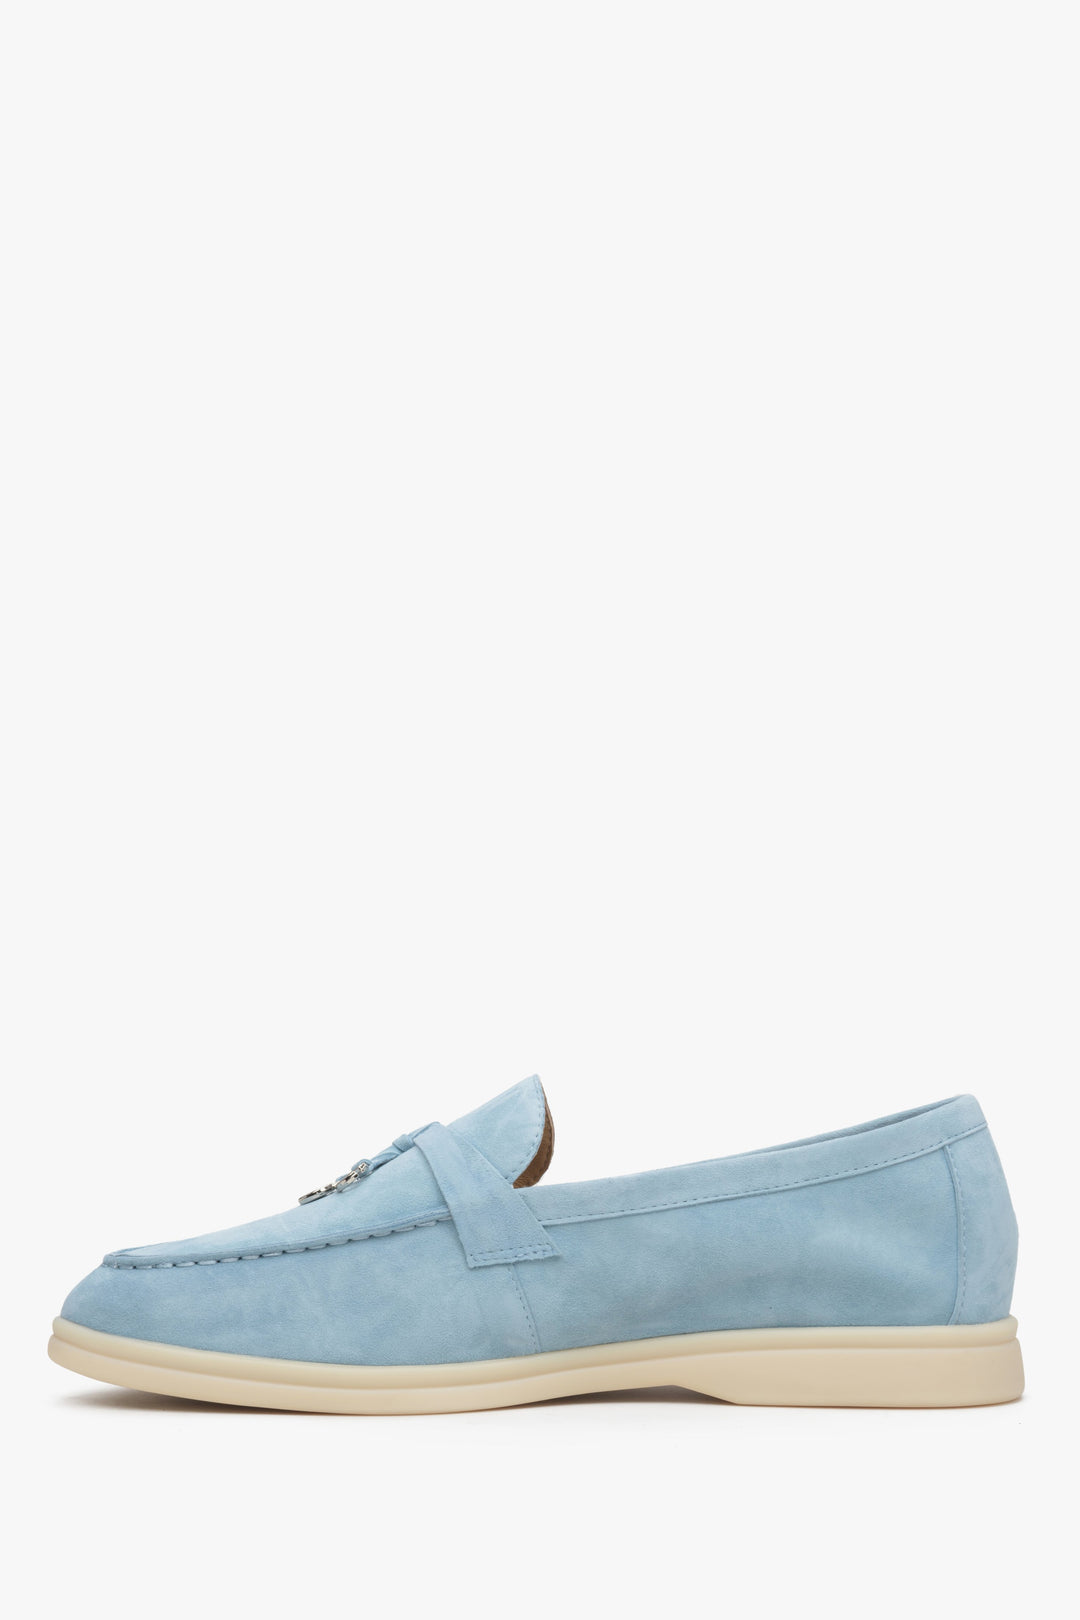 Velour and leather light blue women's loafers with an elegant tassel.